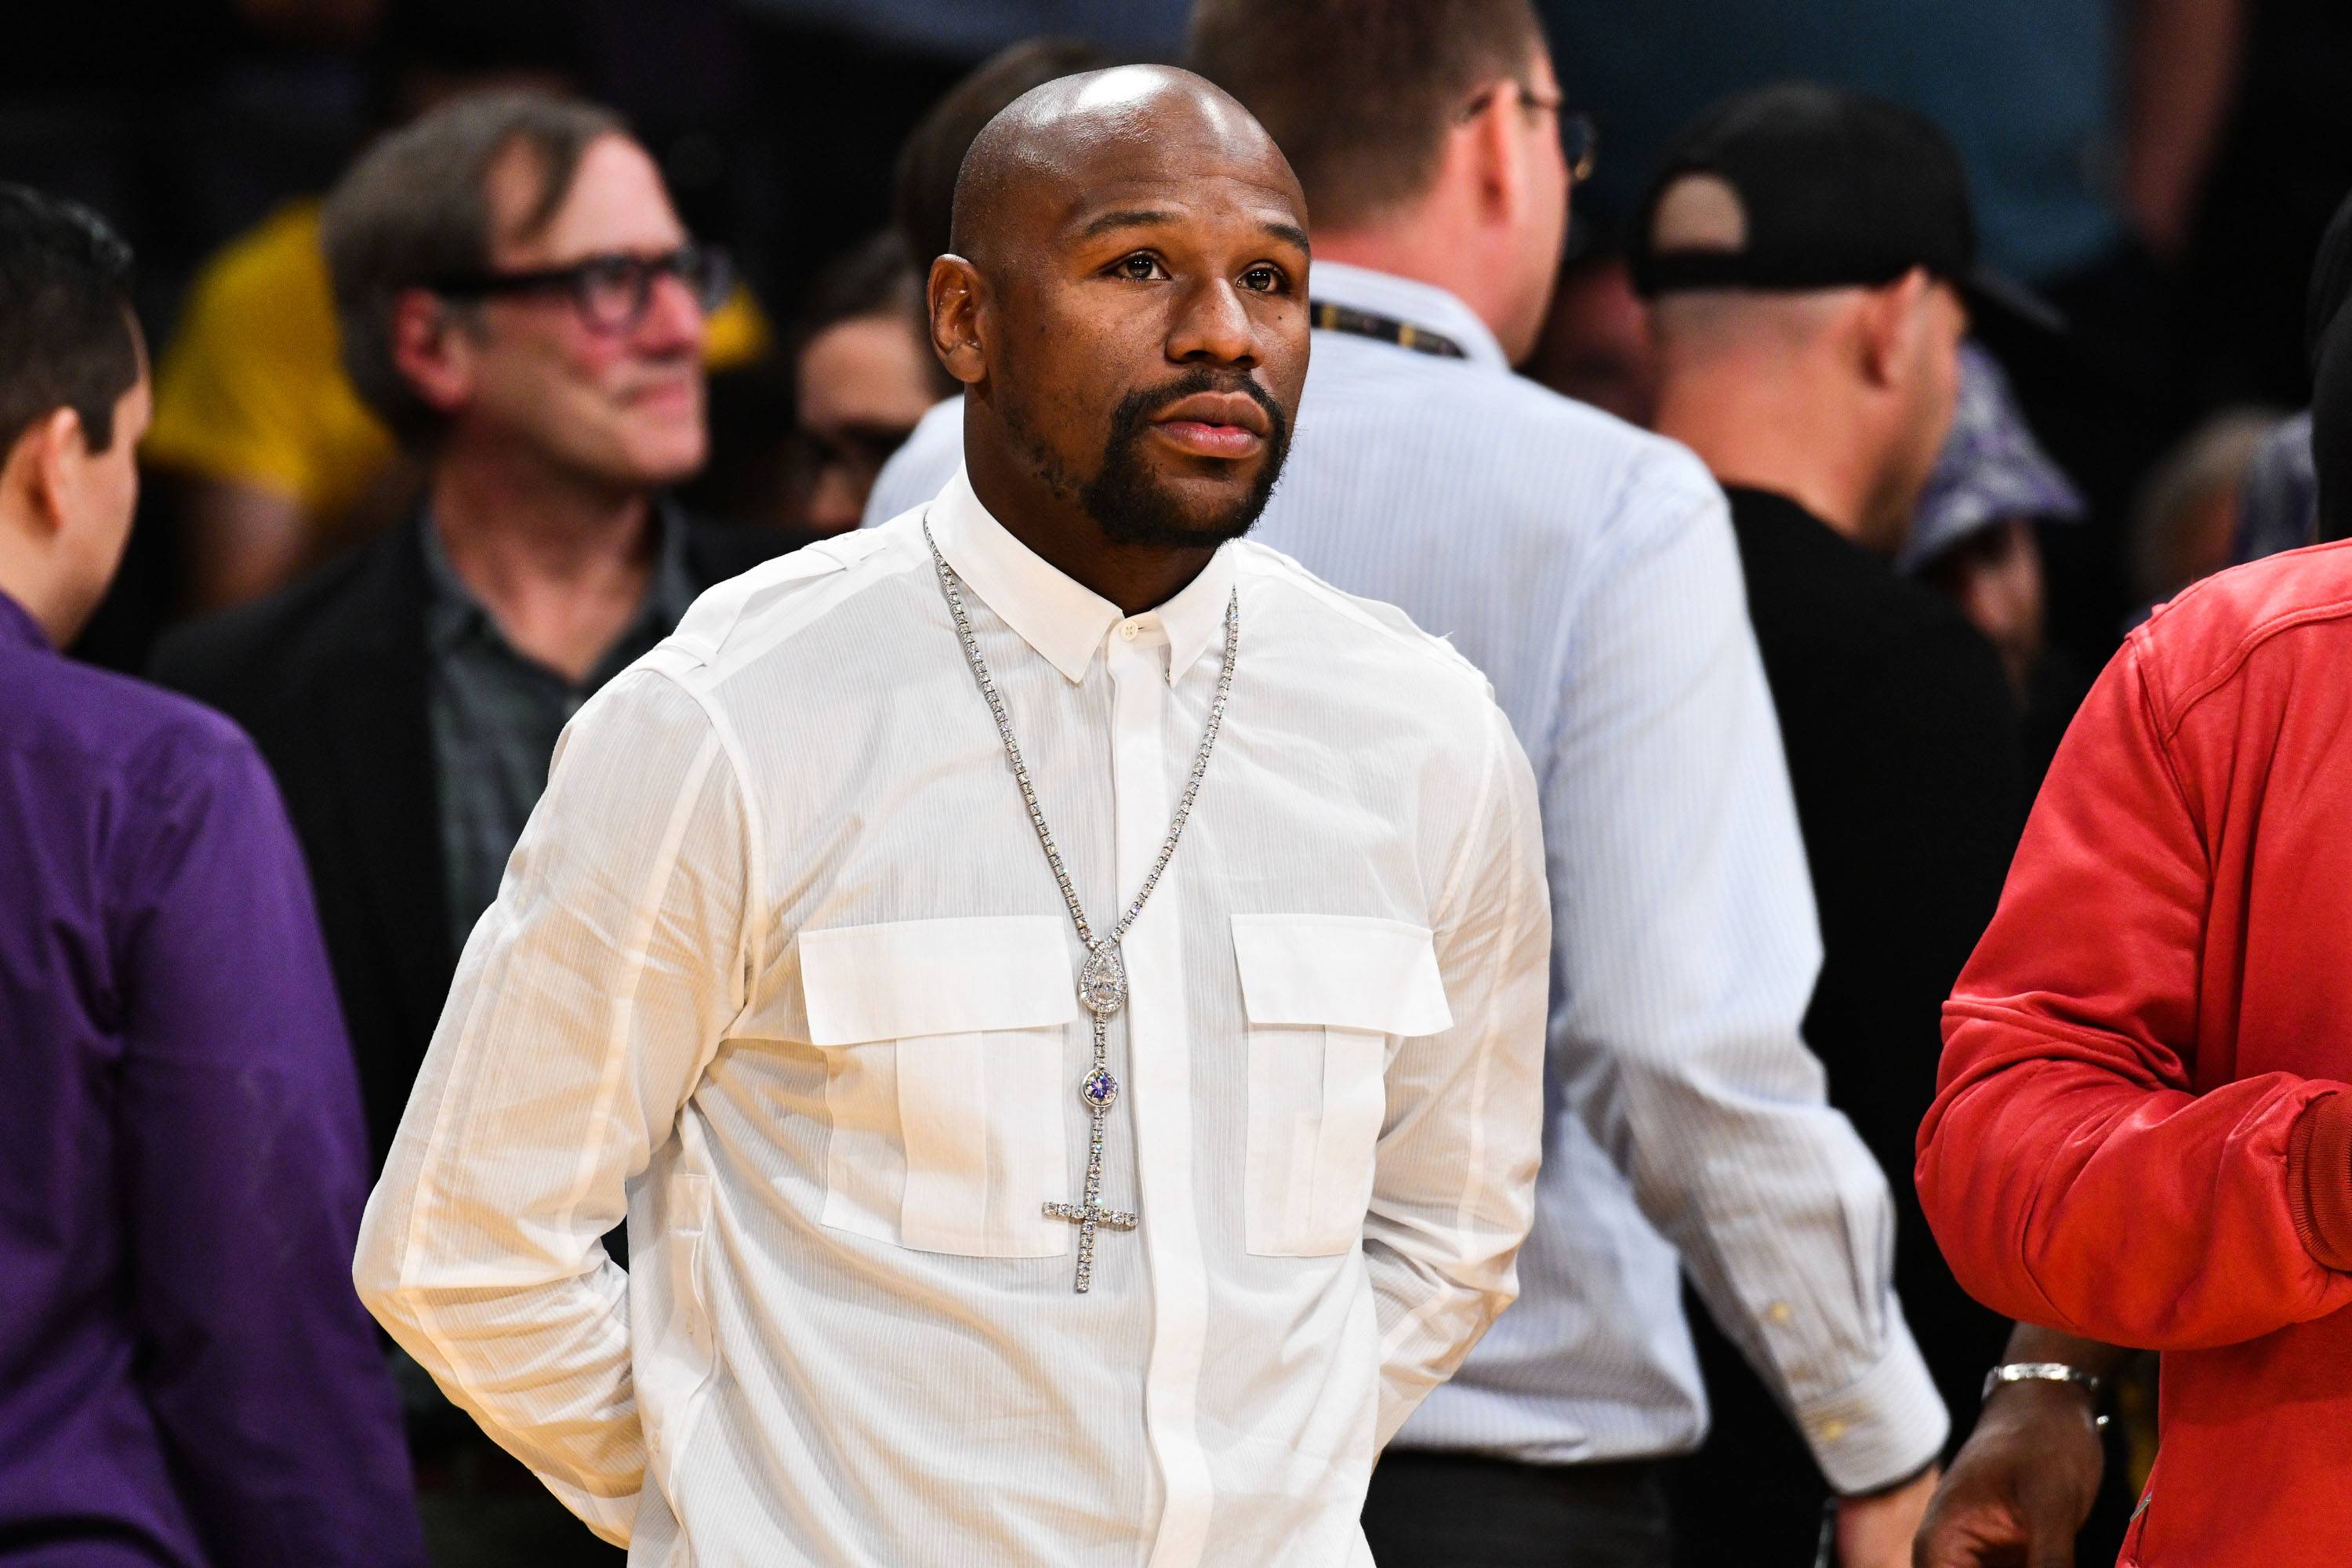 LOS ANGELES, CALIFORNIA - NOVEMBER 11: Floyd Mayweather Jr. attends a basketball game between the Los Angeles Lakers and the Atlanta Hawks at Staples Center on November 11, 2018 in Los Angeles, California. (Photo by Allen Berezovsky/Getty Images)